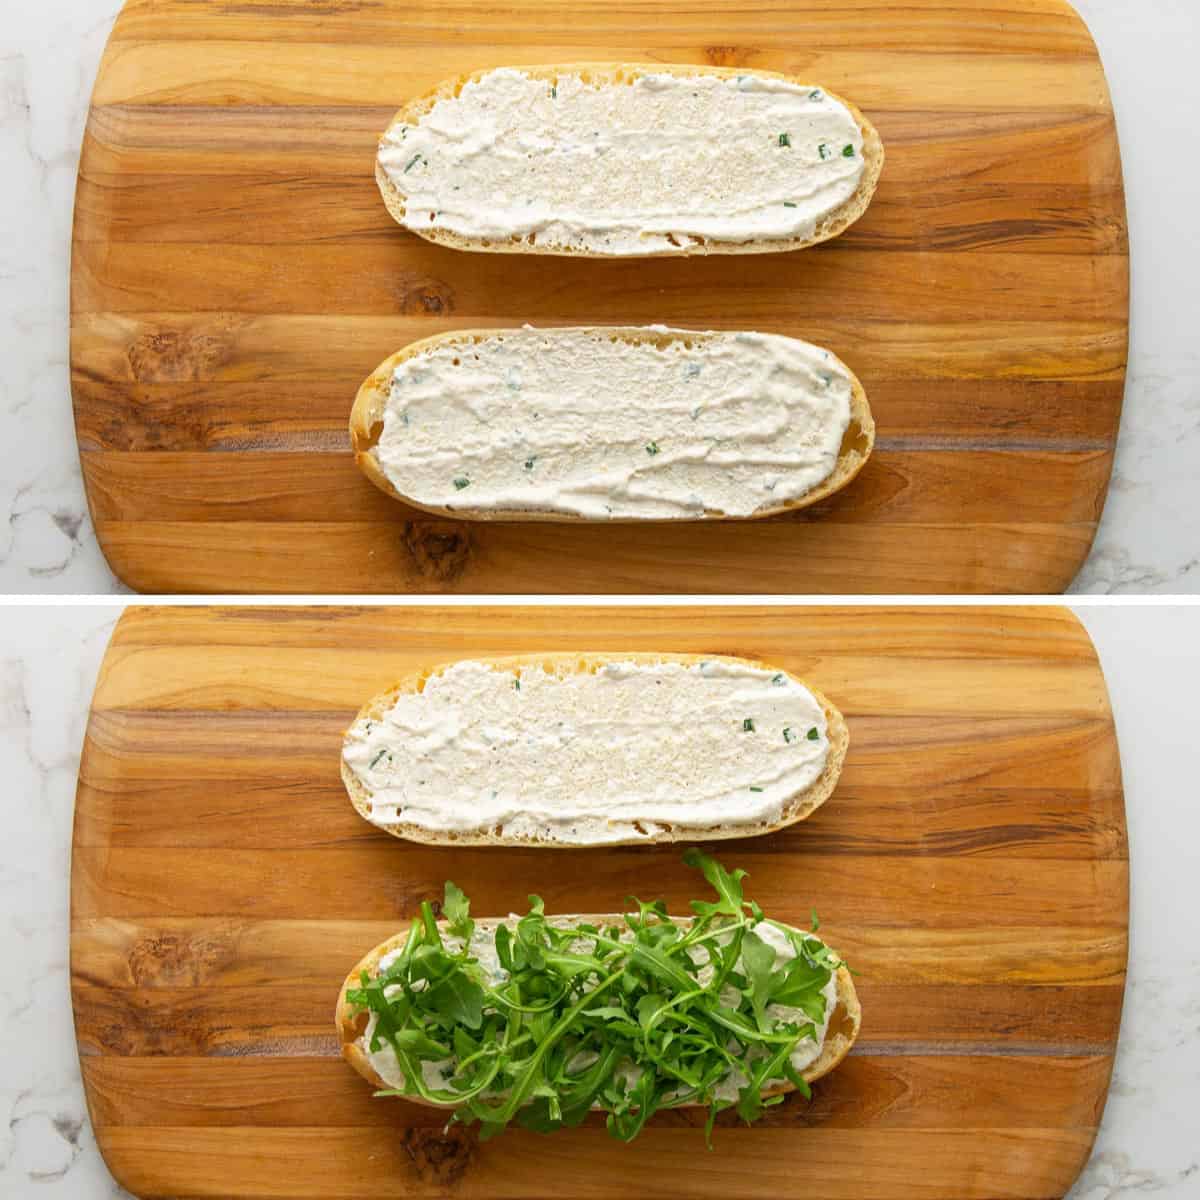 A collage of two images showing steps of how to make a prime rib sandwich.